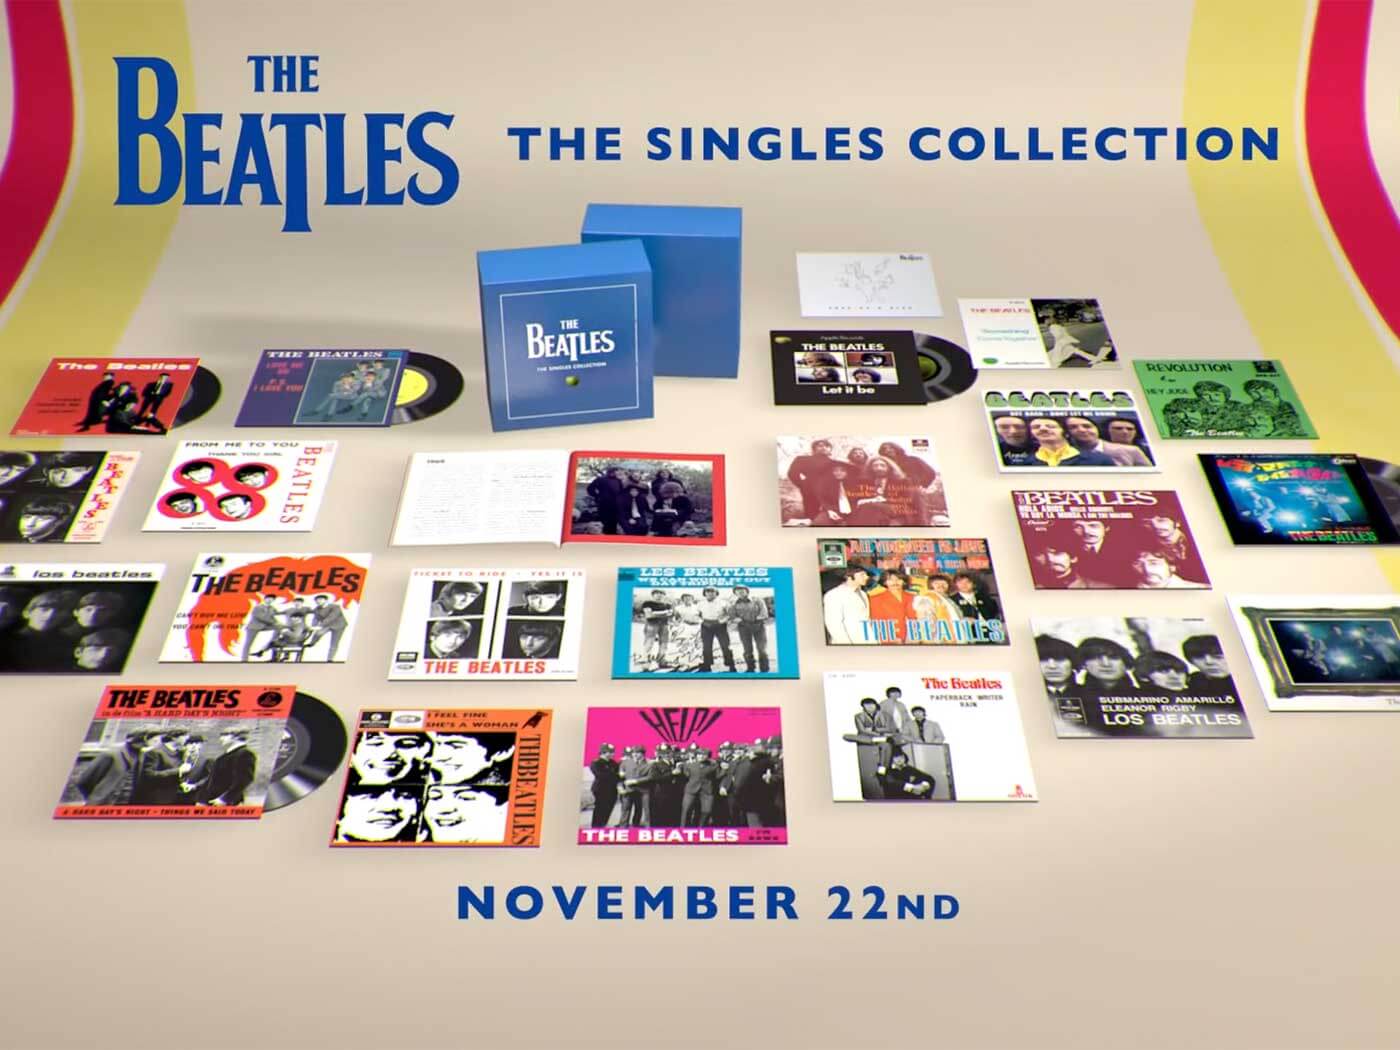 The Beatles announce 'The Singles Collection' vinyl box set 